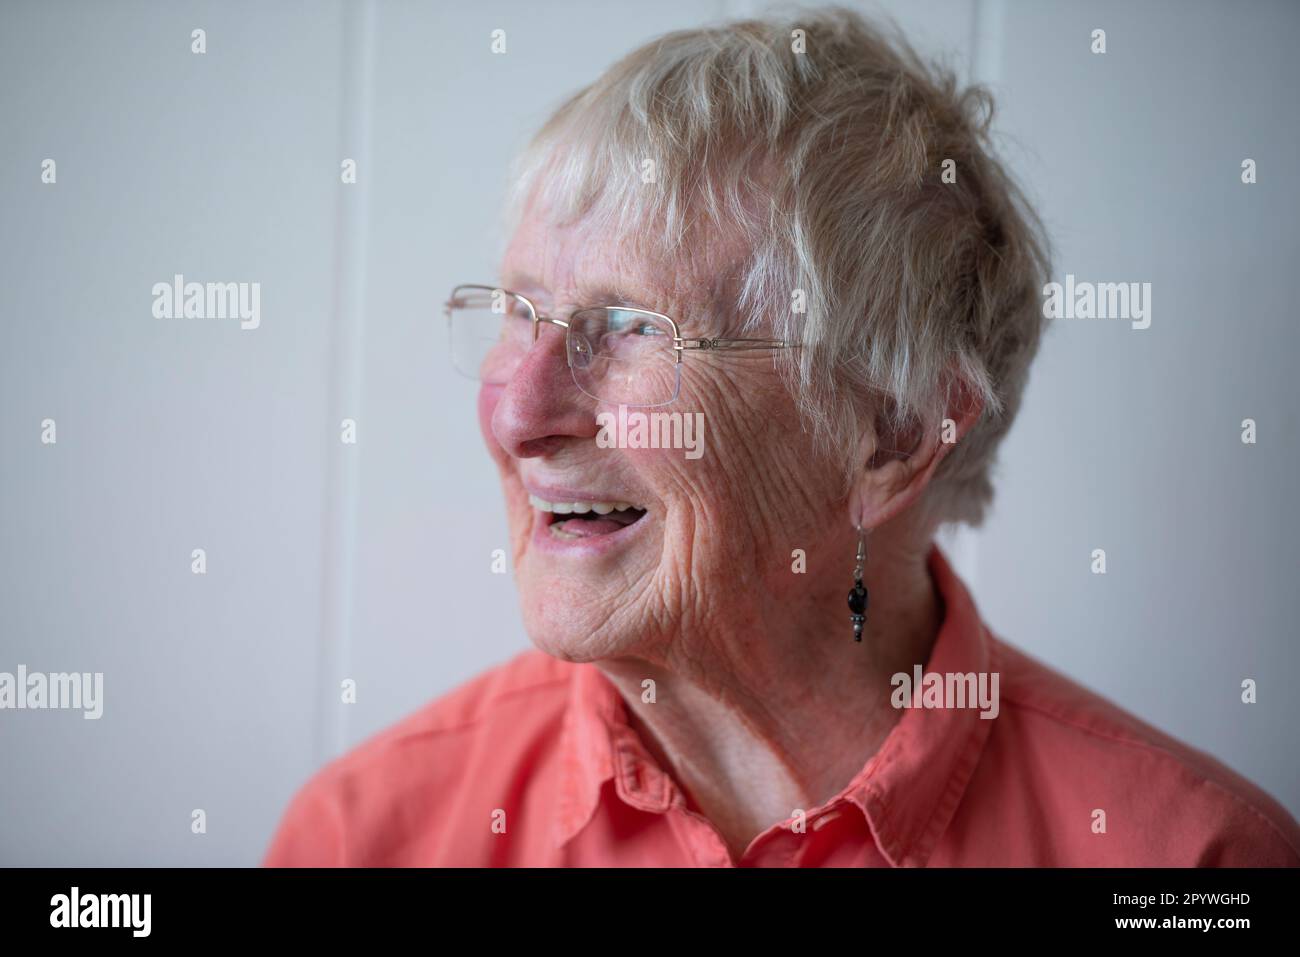 An elderly woman in her 90s, wearing an orange shirt lit with natural light from the side. Stock Photo